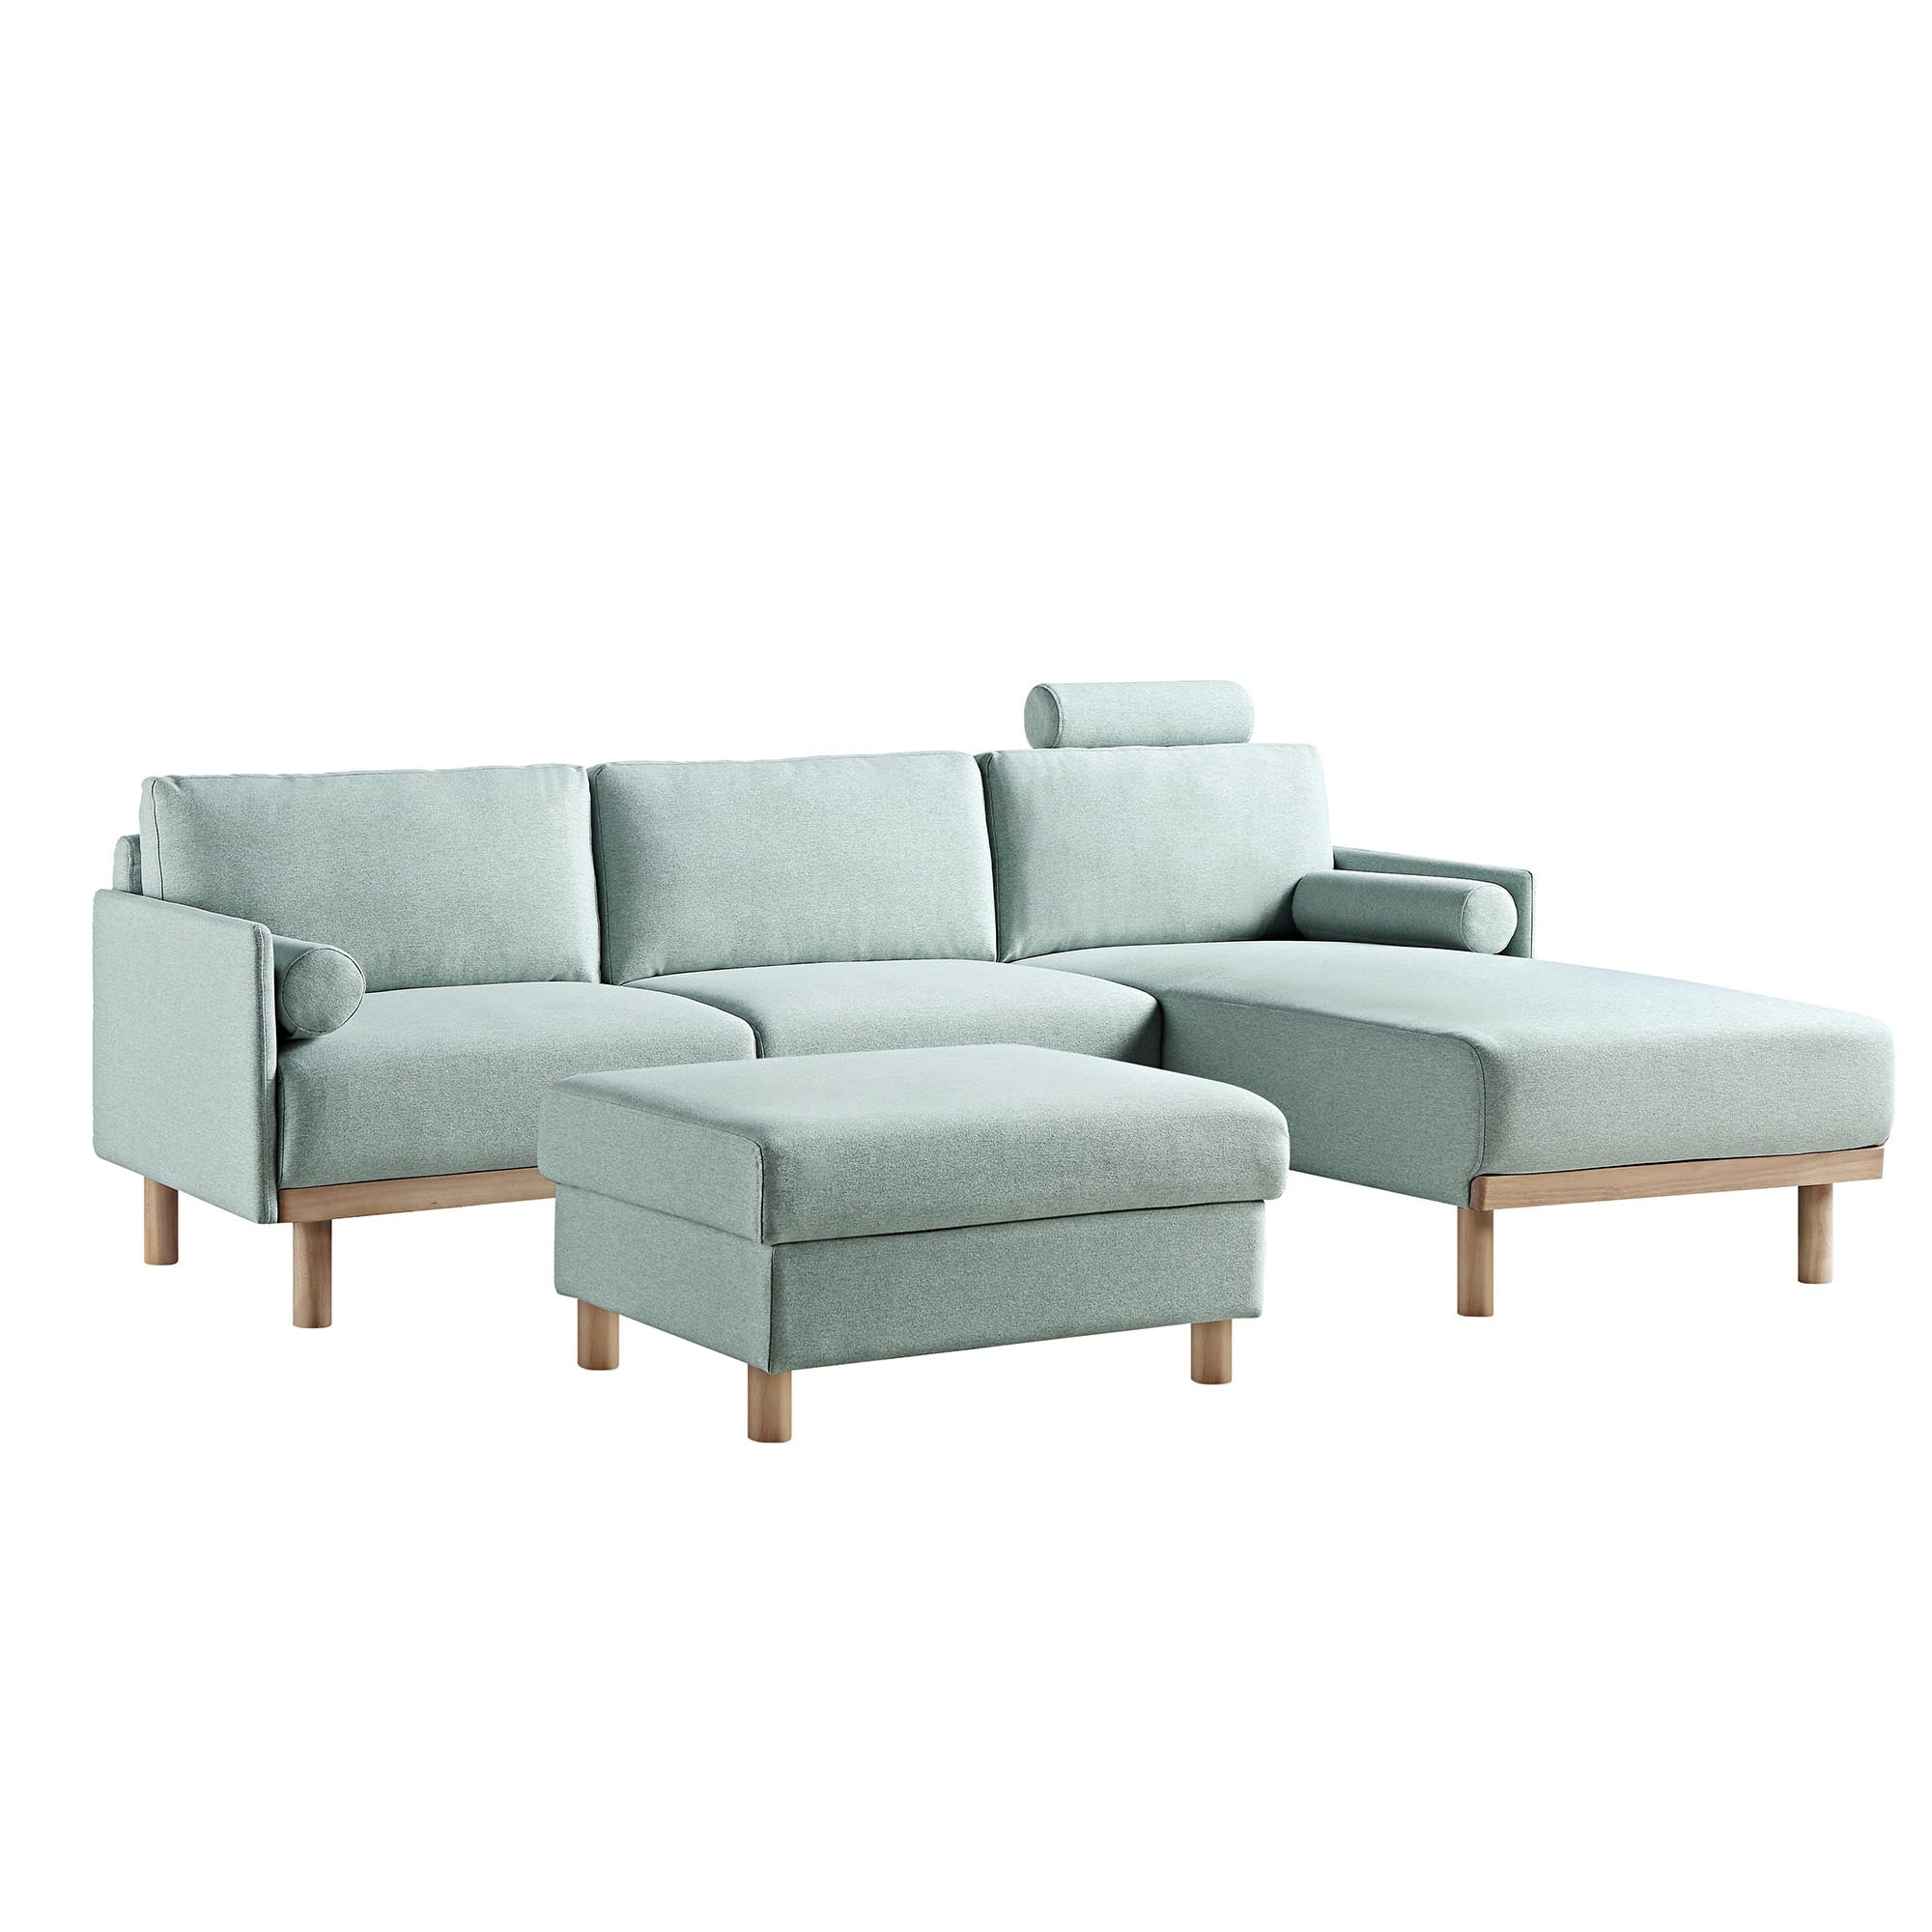 Timber Sage Green Fabric Sofa, Large 3-Seater Chaise Sofa Right Hand